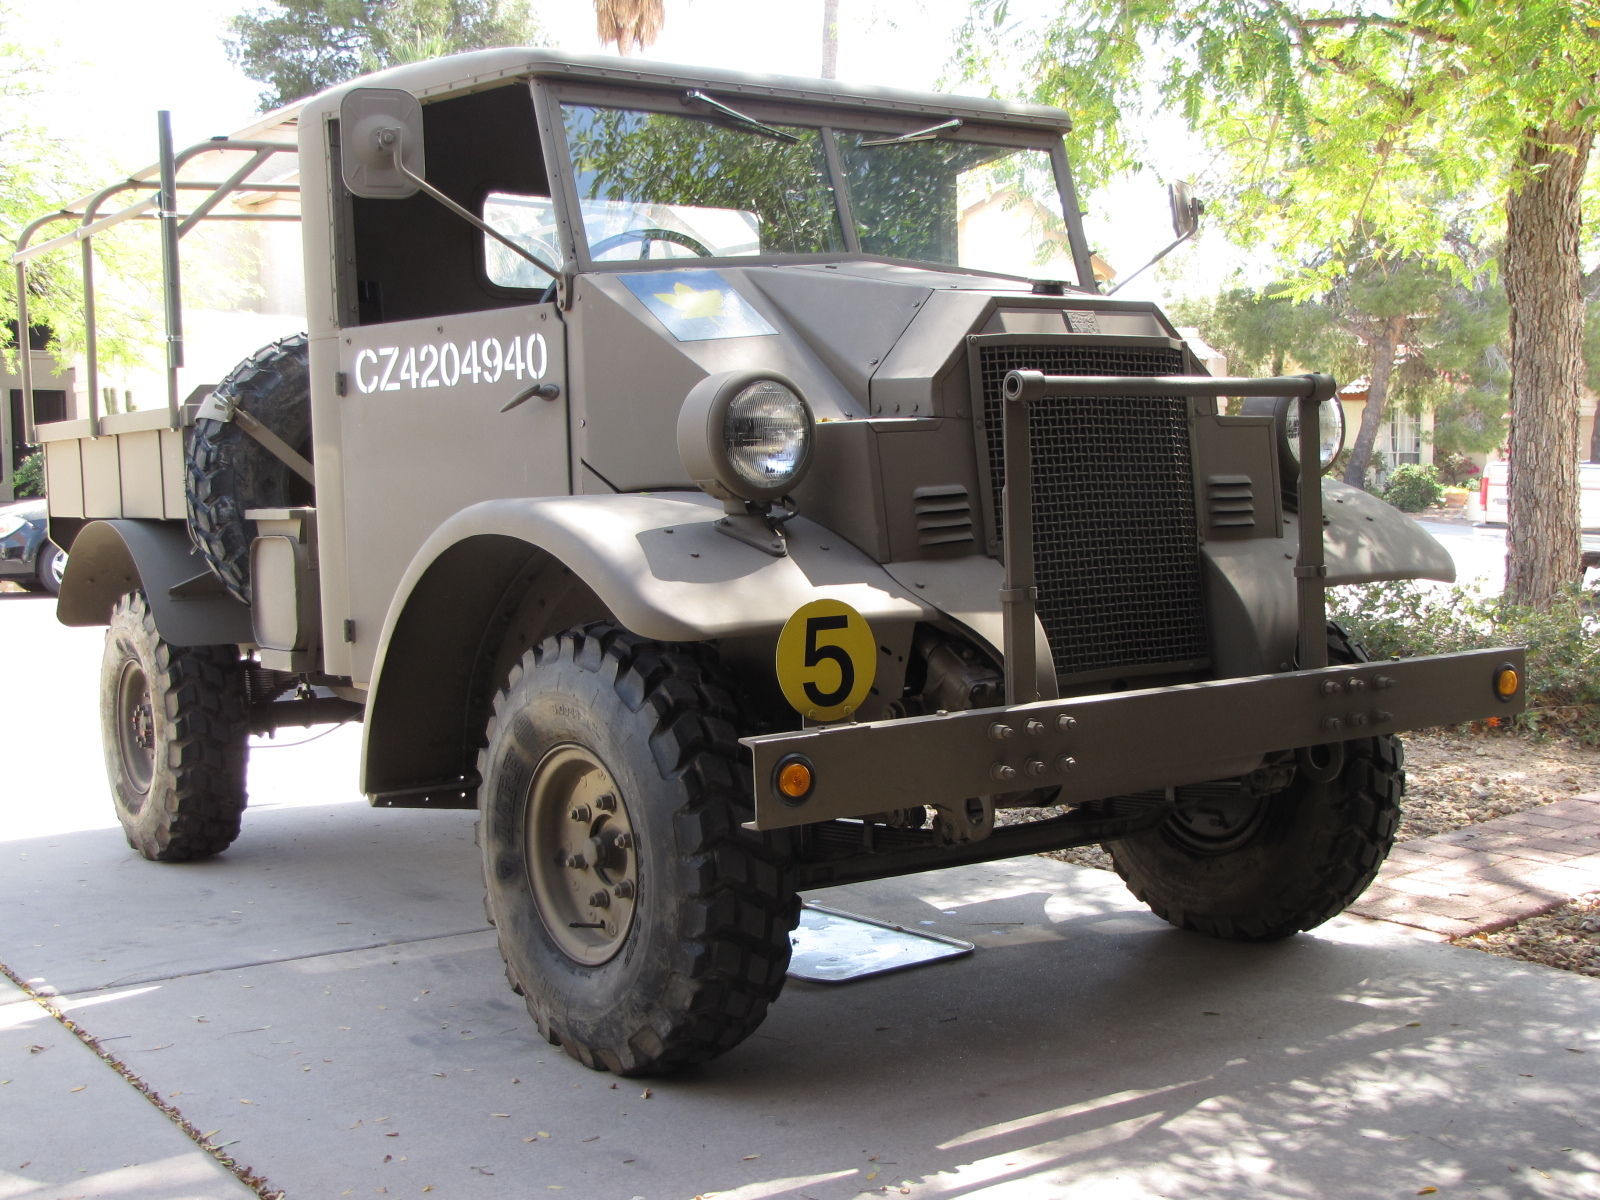 Restored Canadian Military 1940 Ford F8 eBay Find